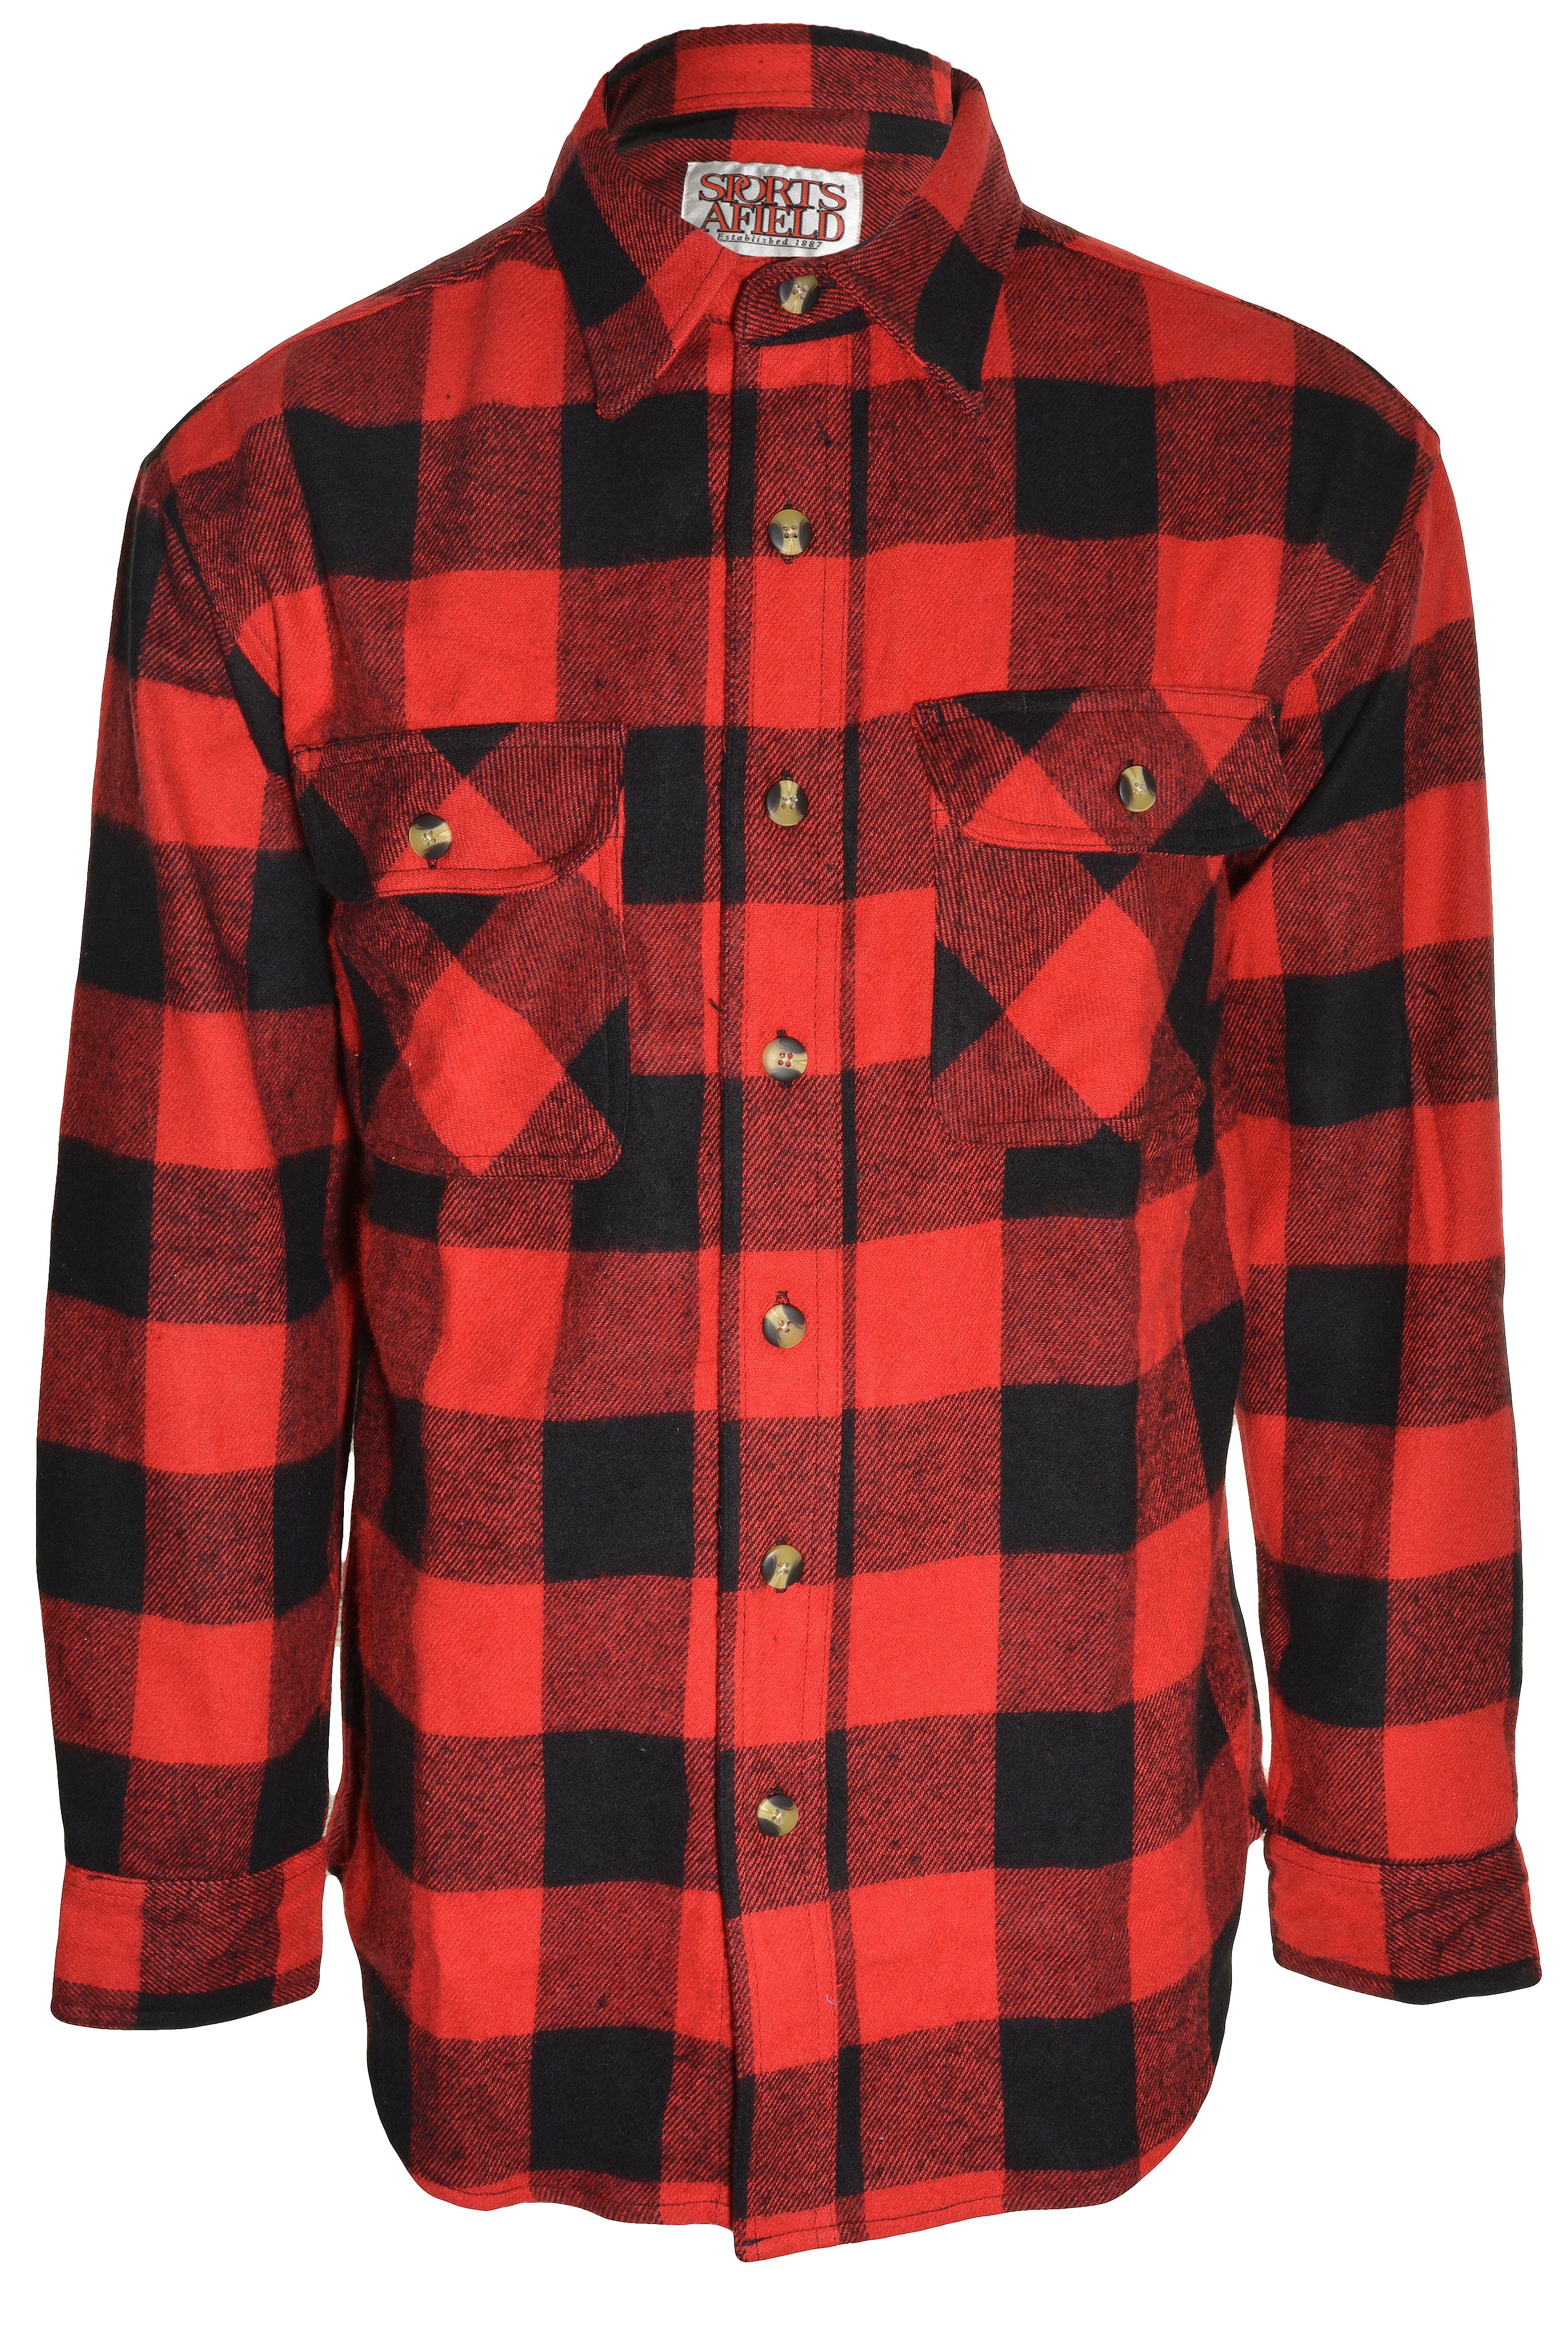 Sports Afield - Mens Heavy Duty Flannel Shirt (Red Plaid, X-Large ...